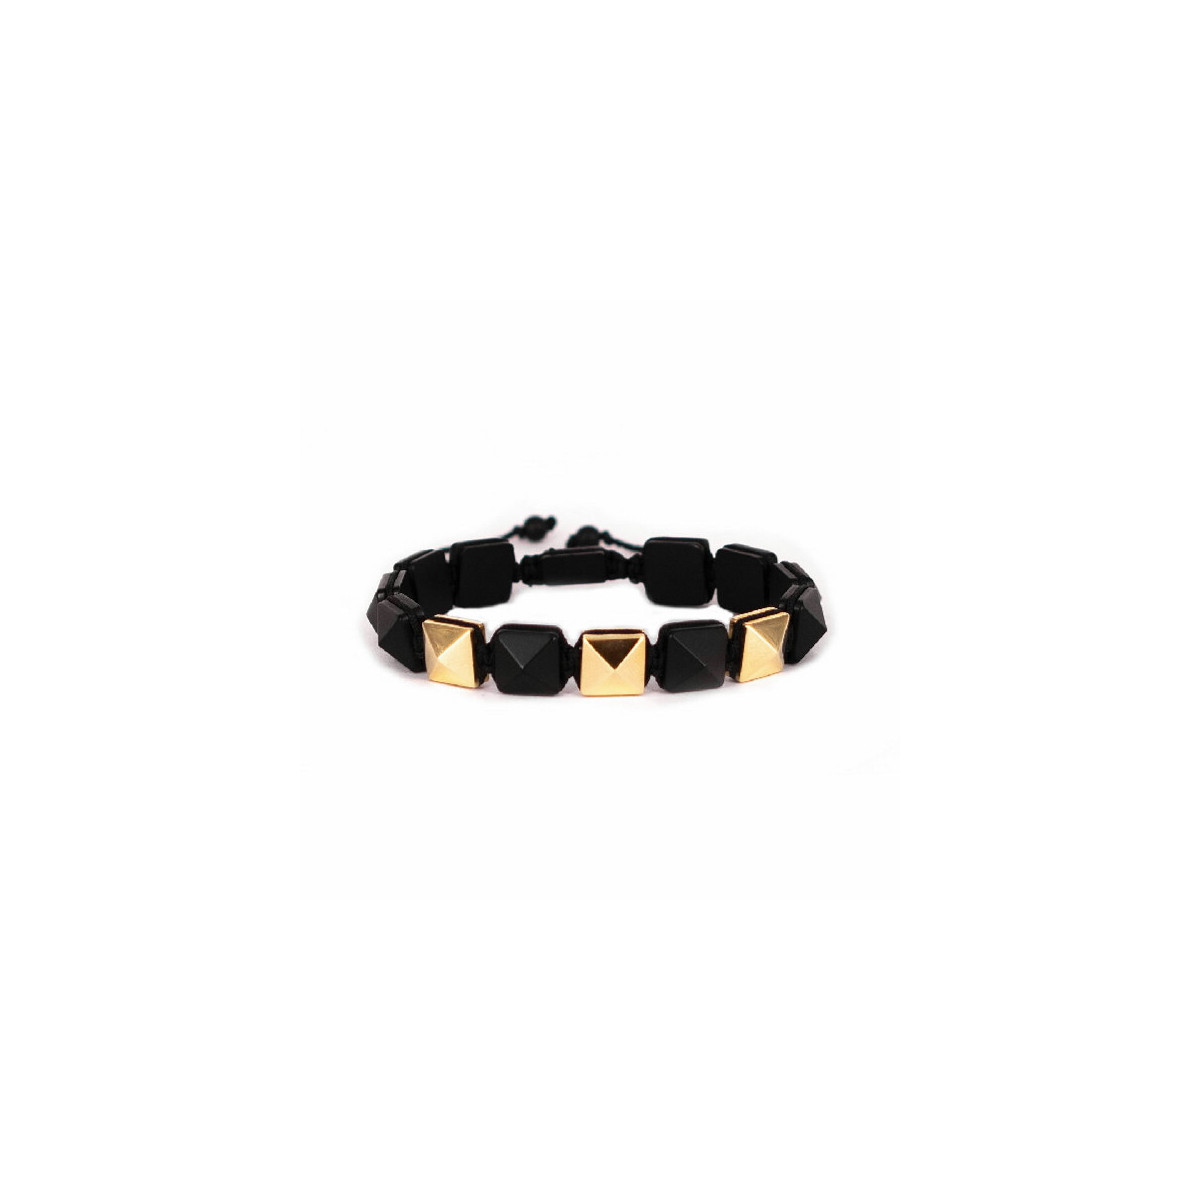 YELLOW GOLD AND ONYX BRACELET